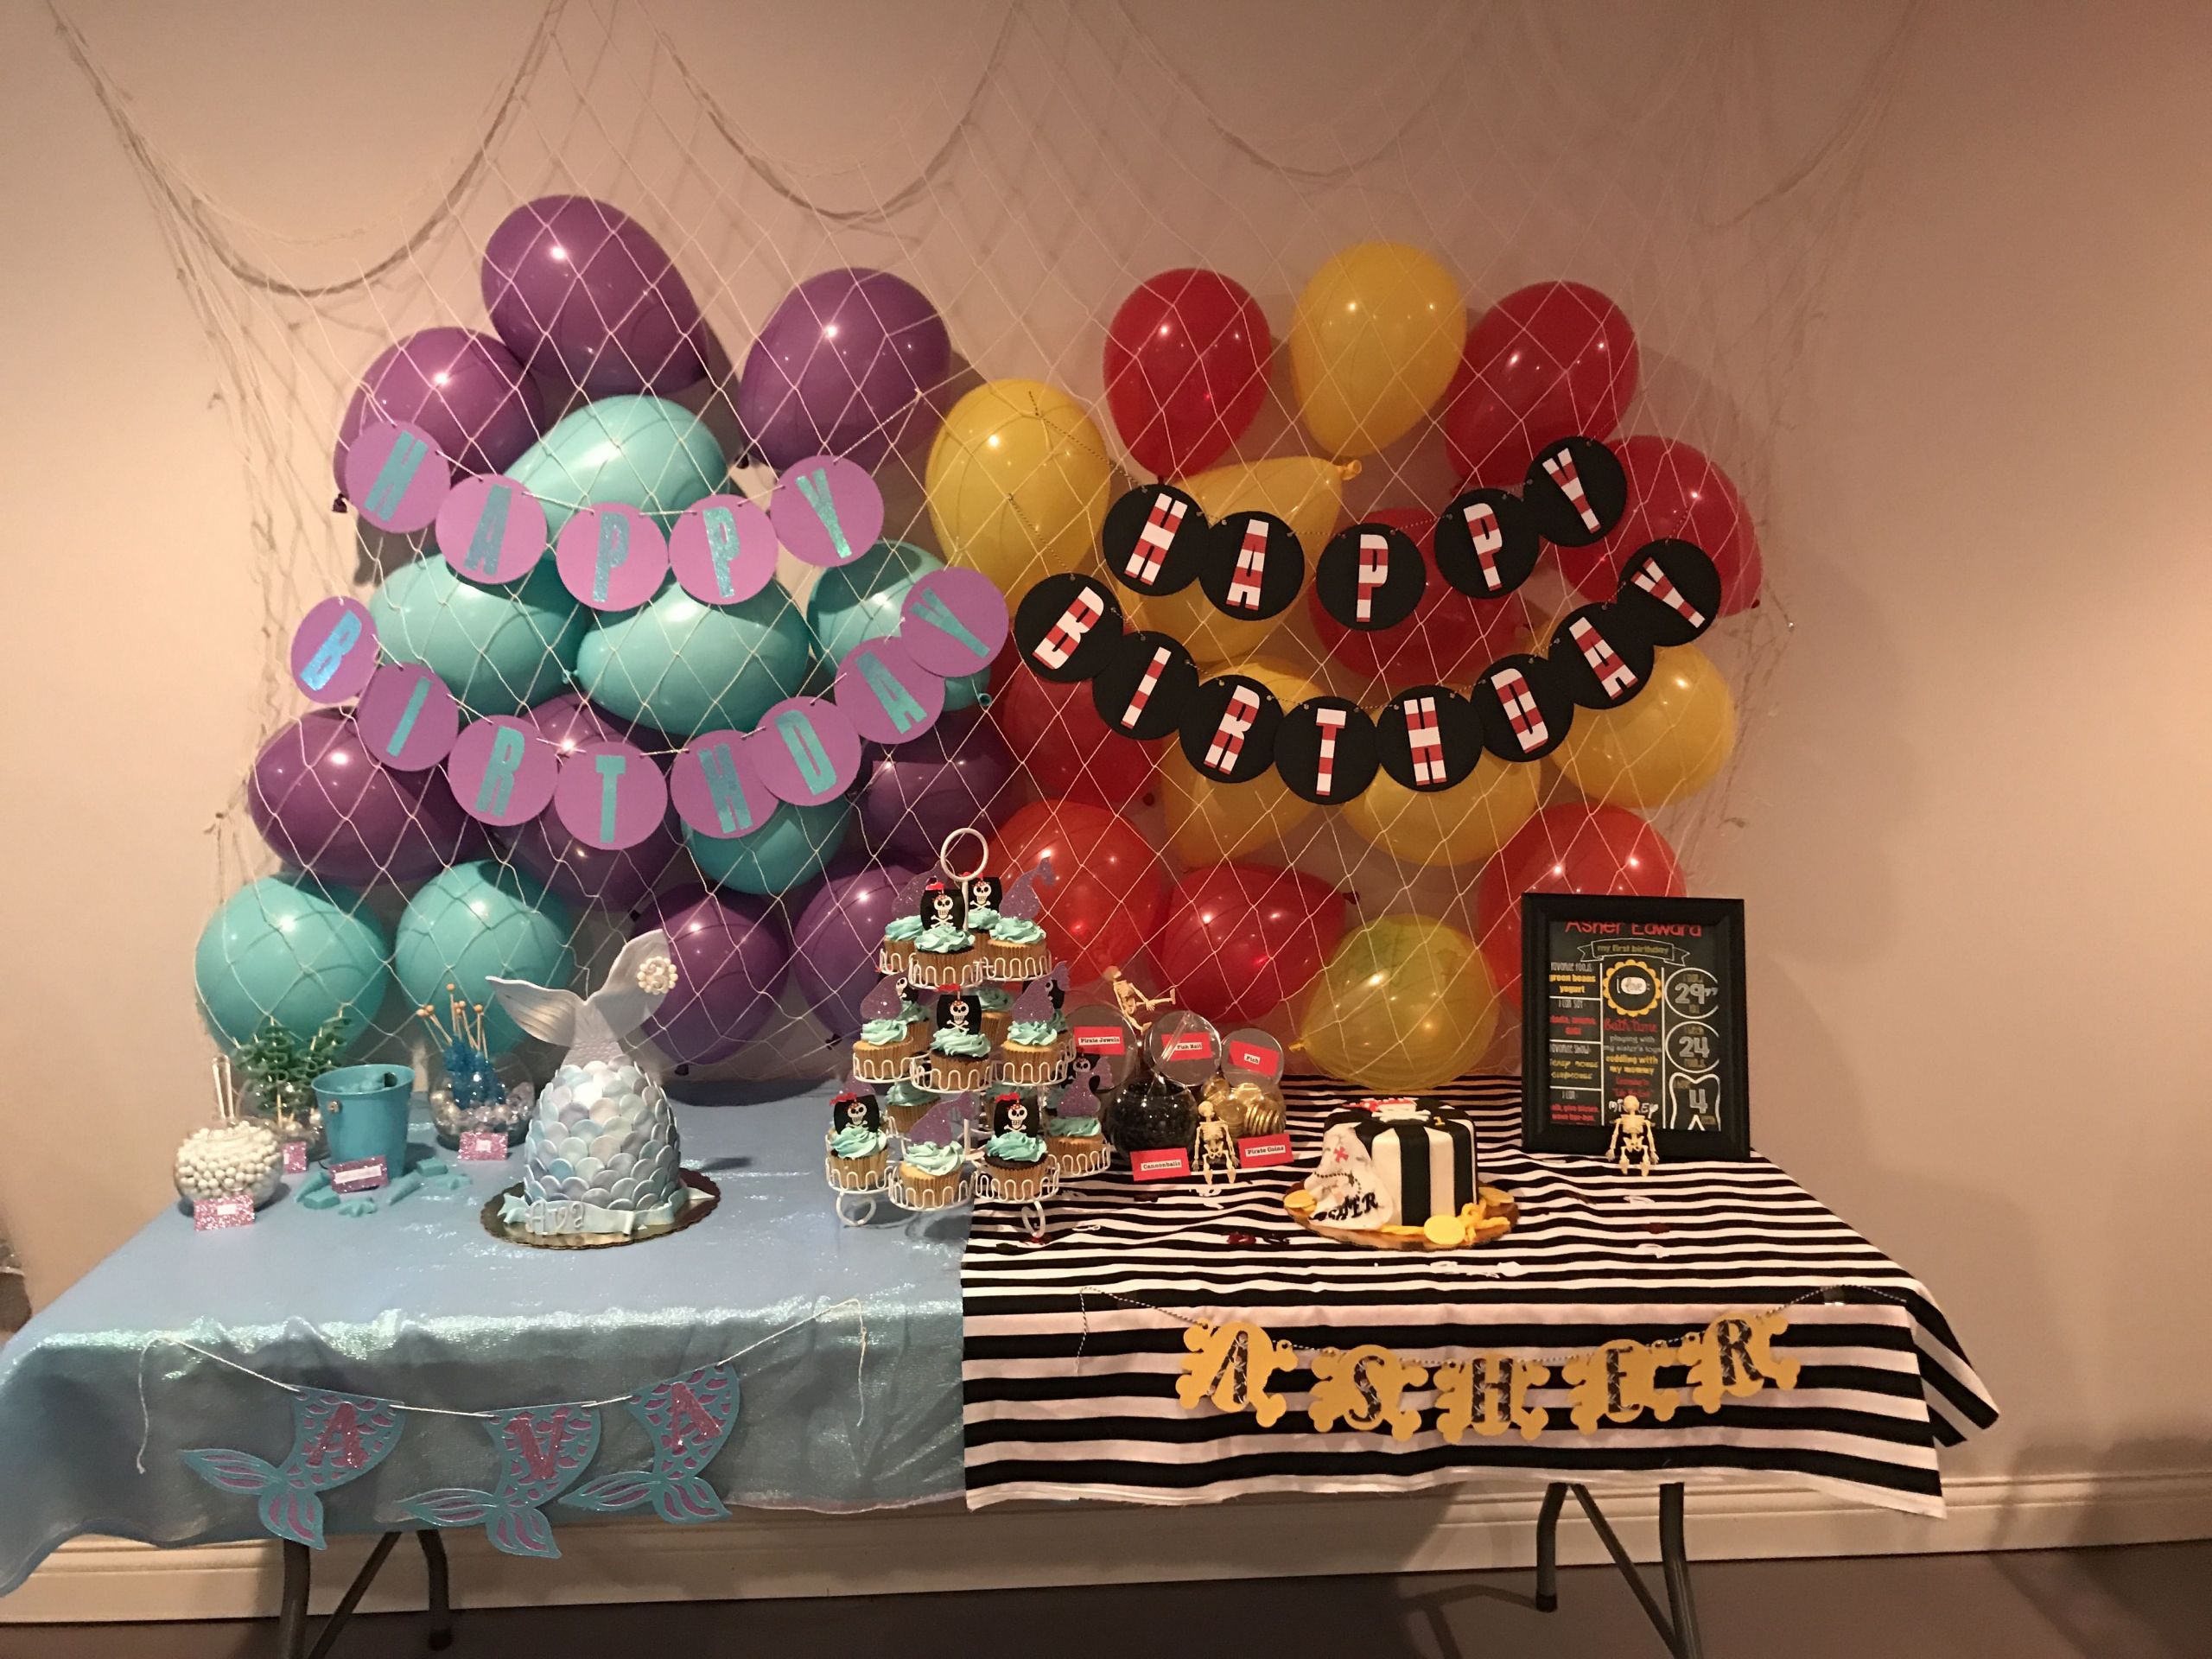 Mermaid And Pirate Party Ideas
 Mermaid and pirate birthday party